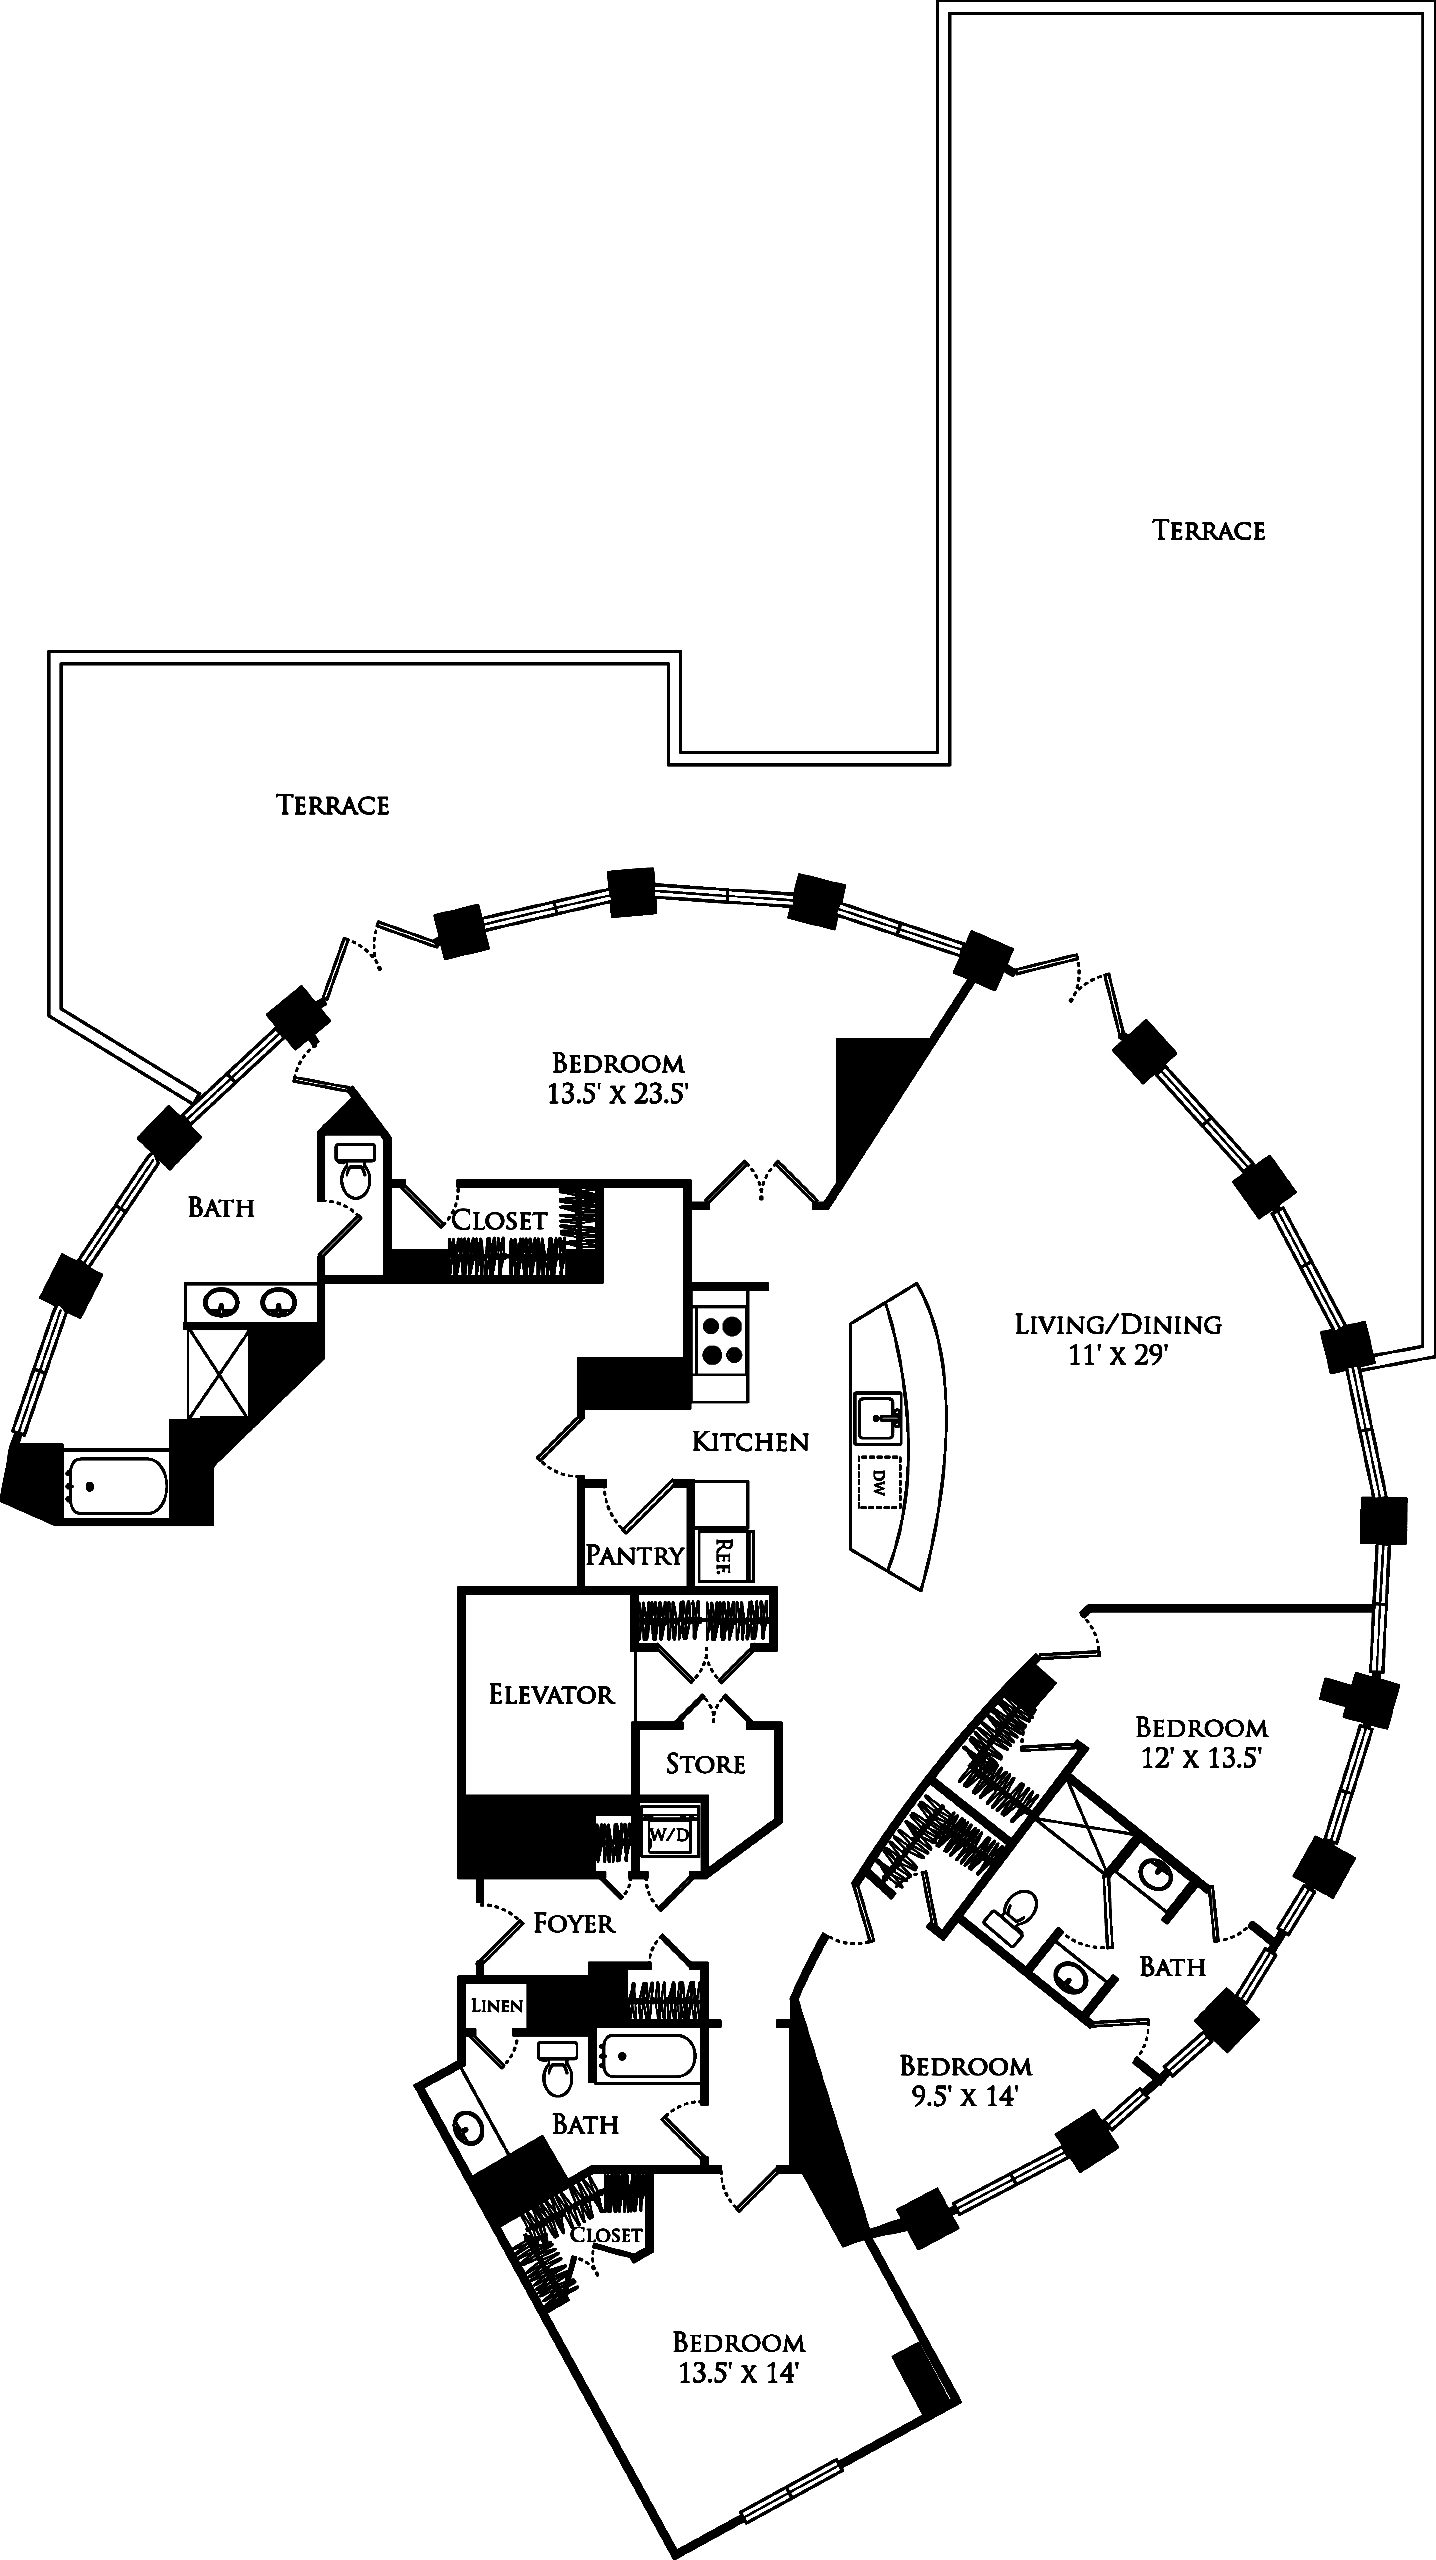 D3B penthouse floor plan is 4 beds, 3 baths and is 2542 square feet